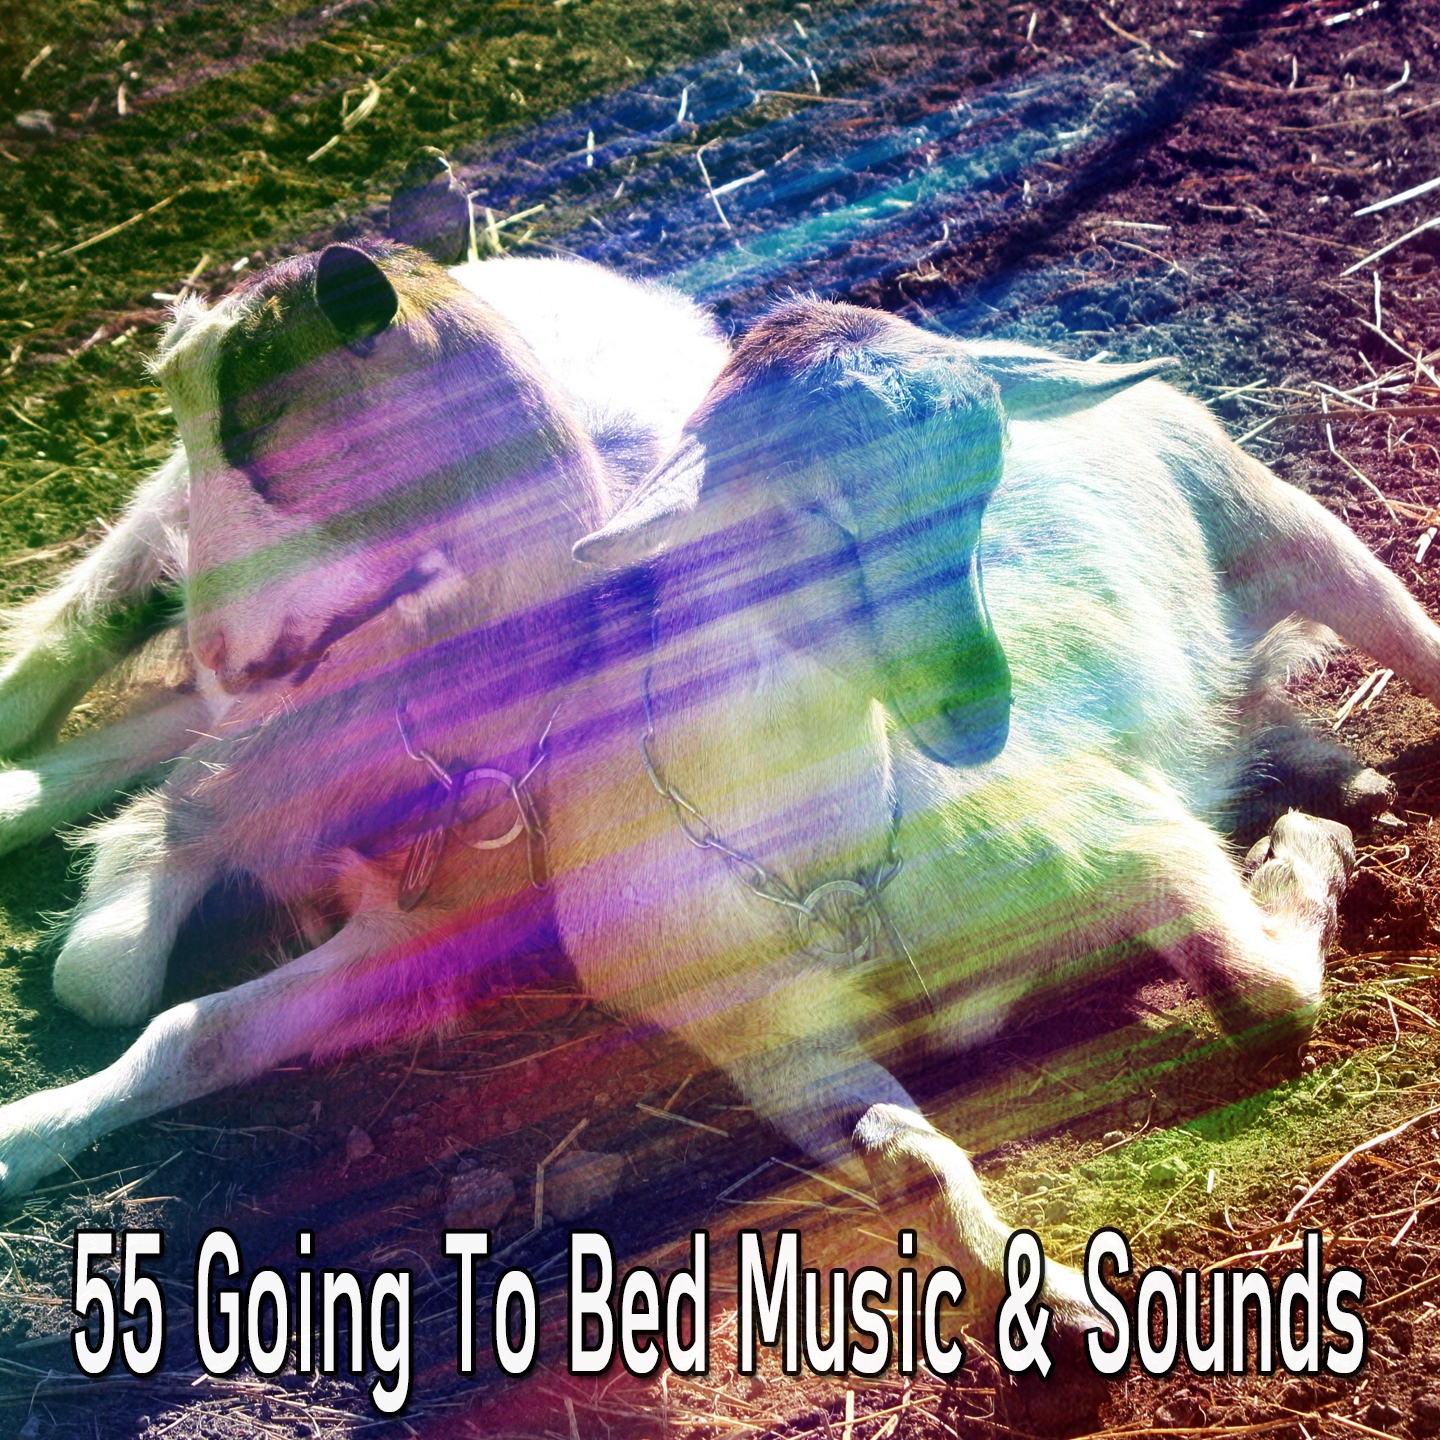 55 Going To Bed Music & Sounds